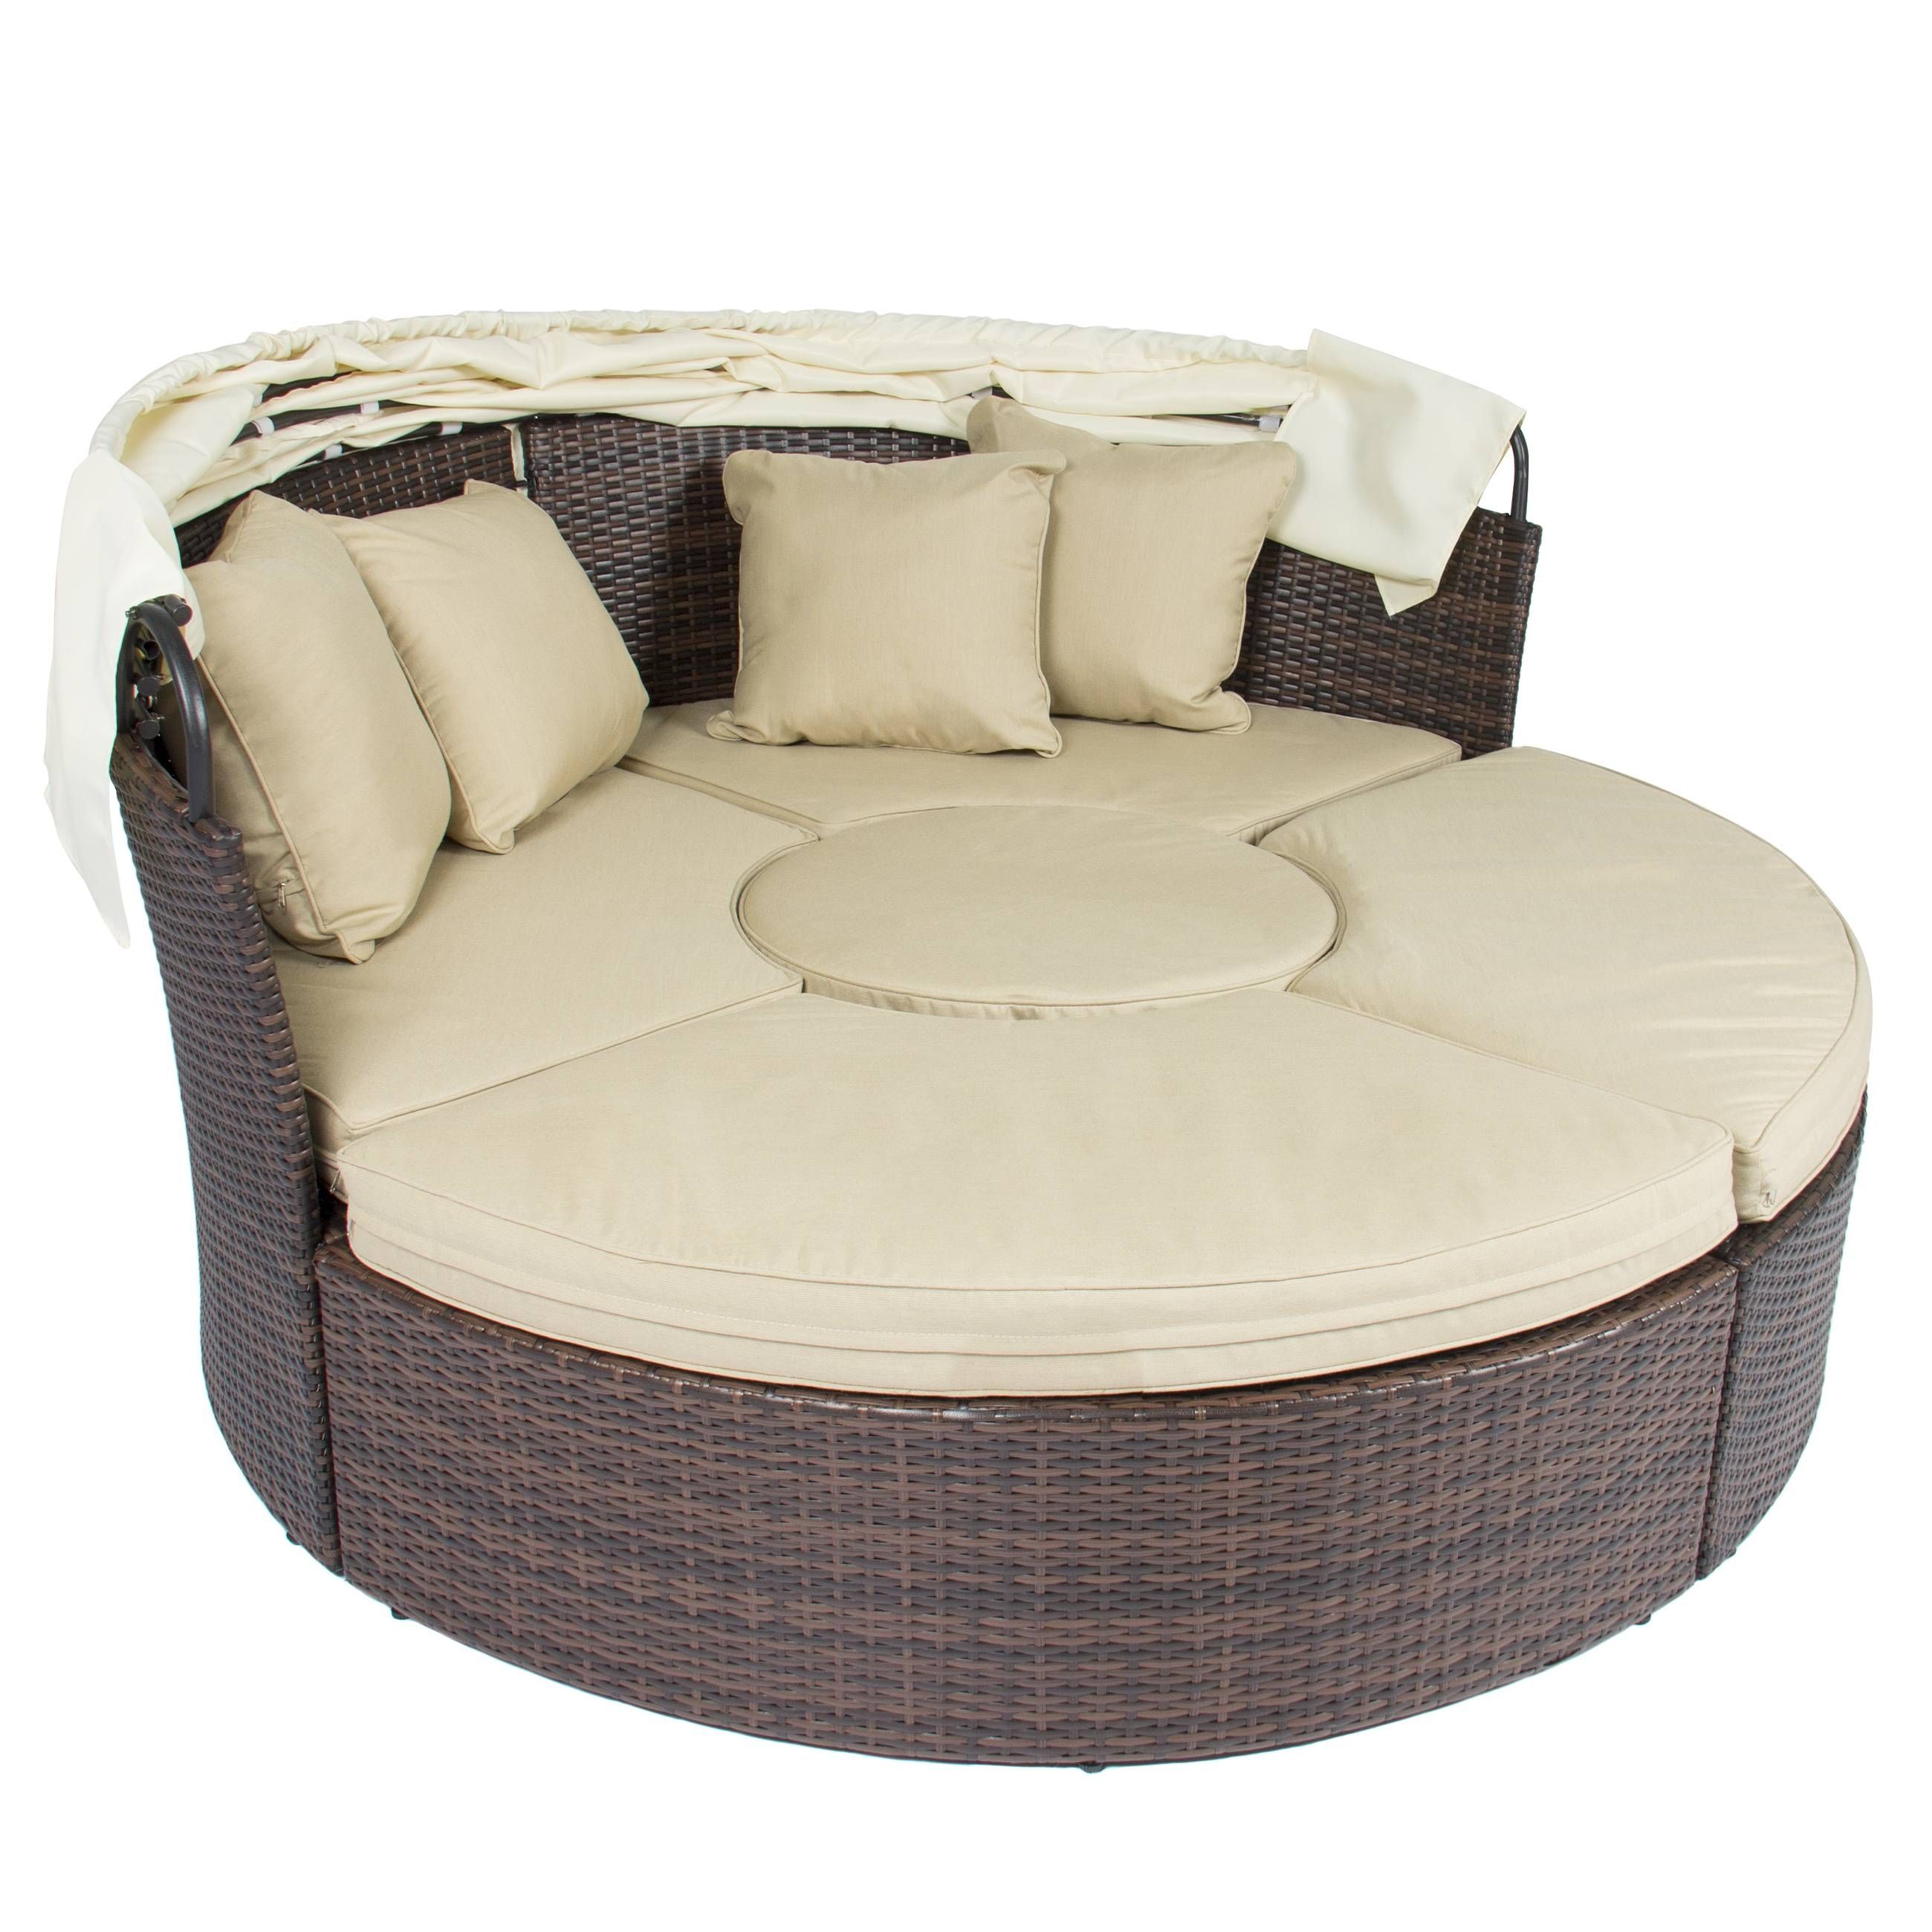 Sofas Center : Round Sofa Chair Swivel Accent And Oversized In Round Sofa Chair Living Room Furniture (View 20 of 30)